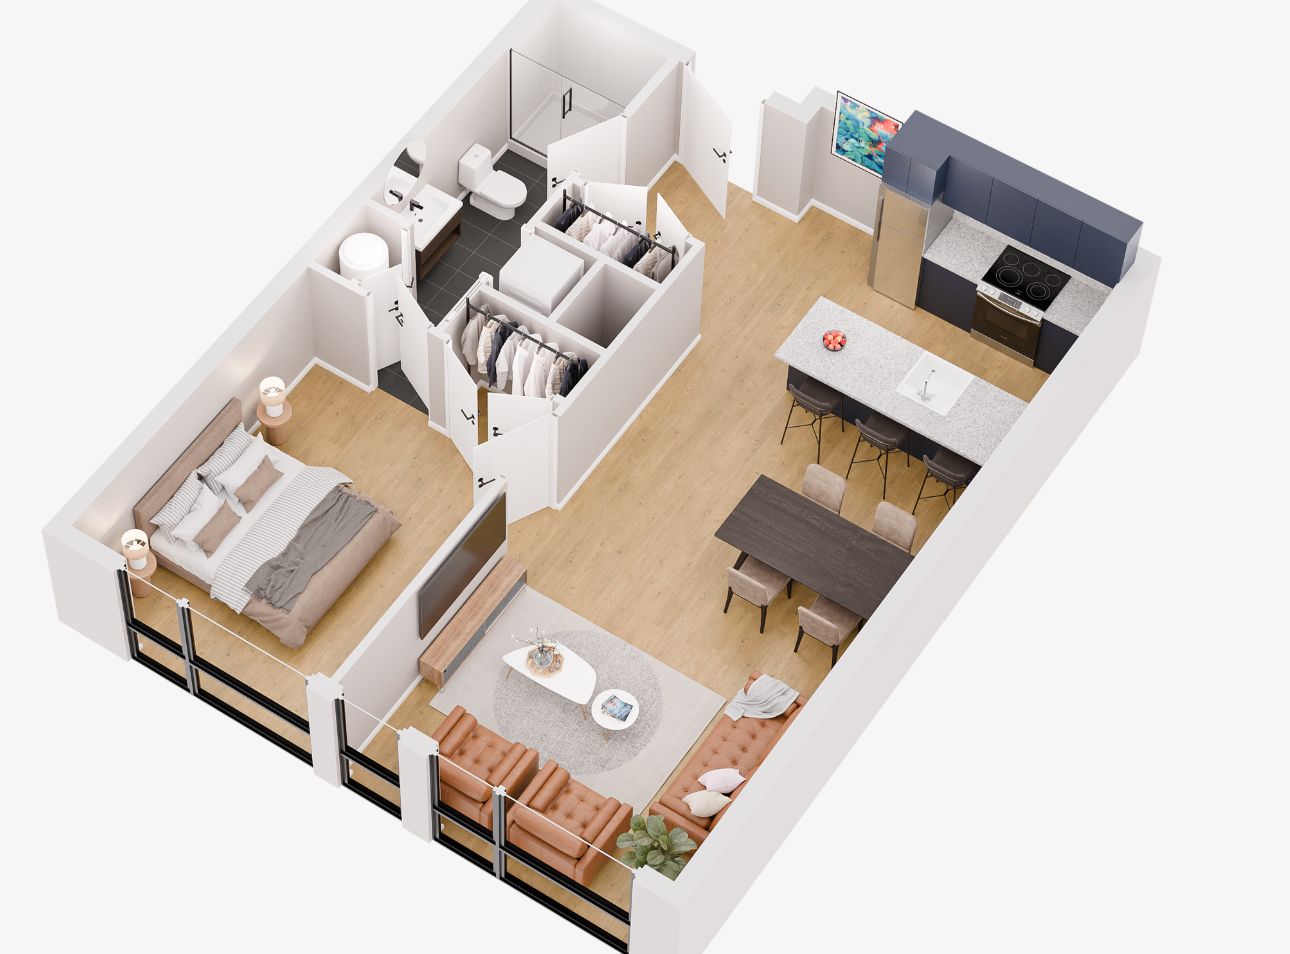 The Luxe Phase I at 1705 North American Street. One-bedroom apartment. Axonometric floor plan via Luxe Fishtown